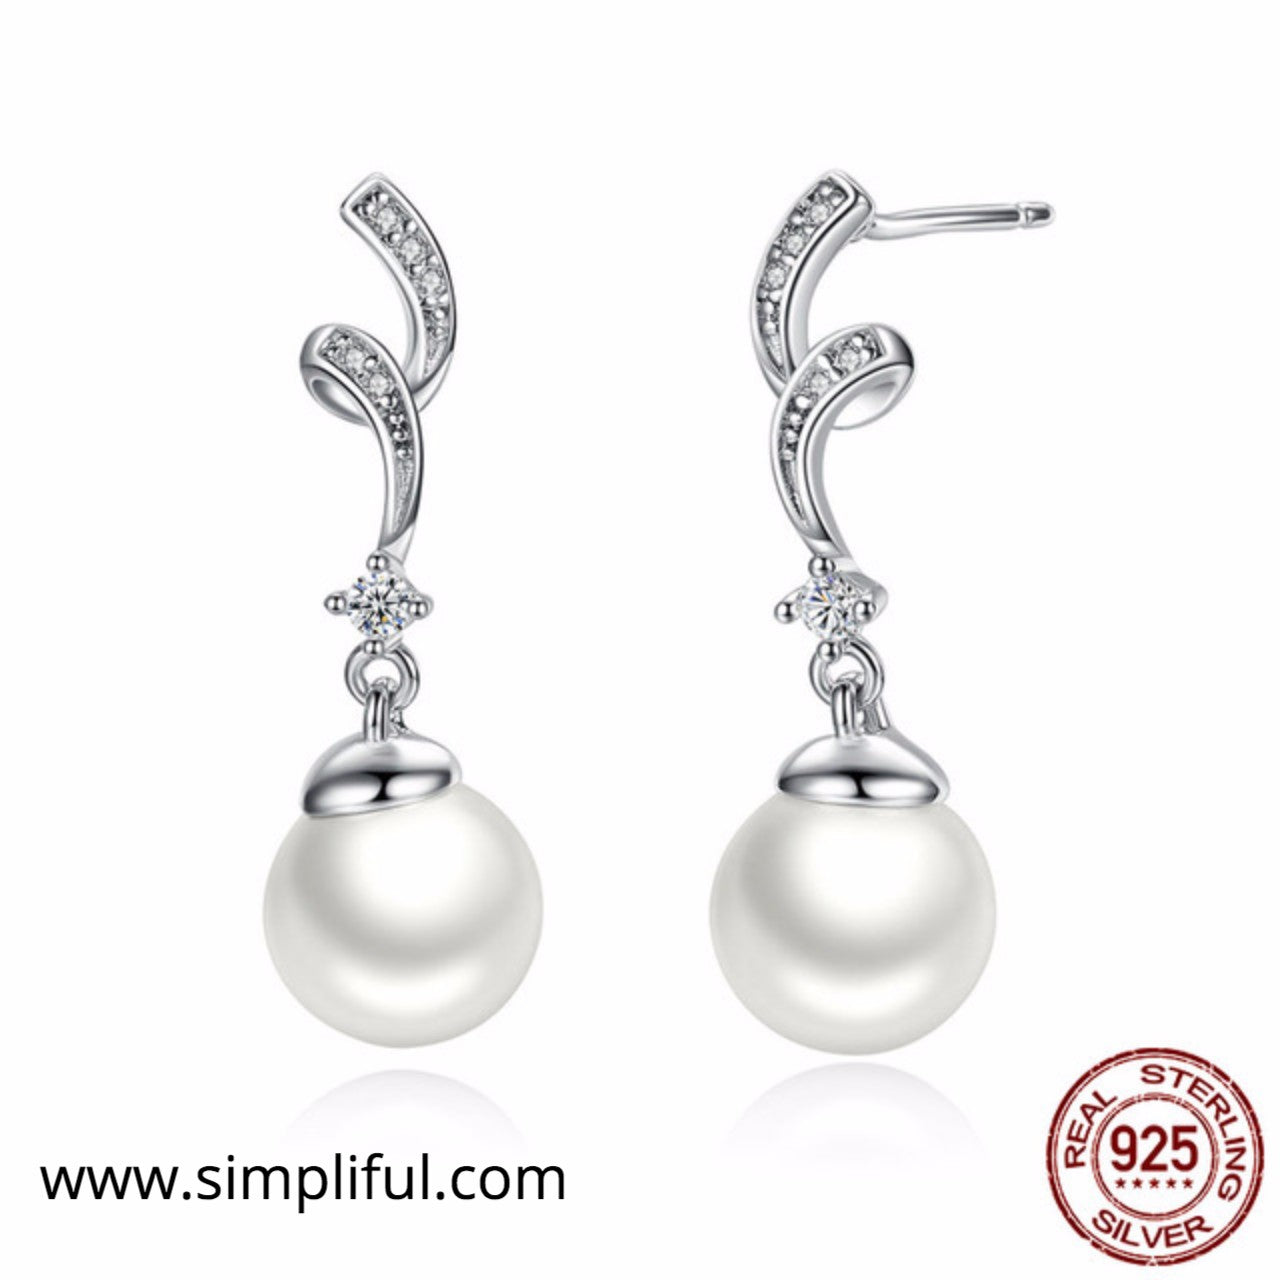 Sterling Silver Twisted Simulated Pearl Earring - Simpliful